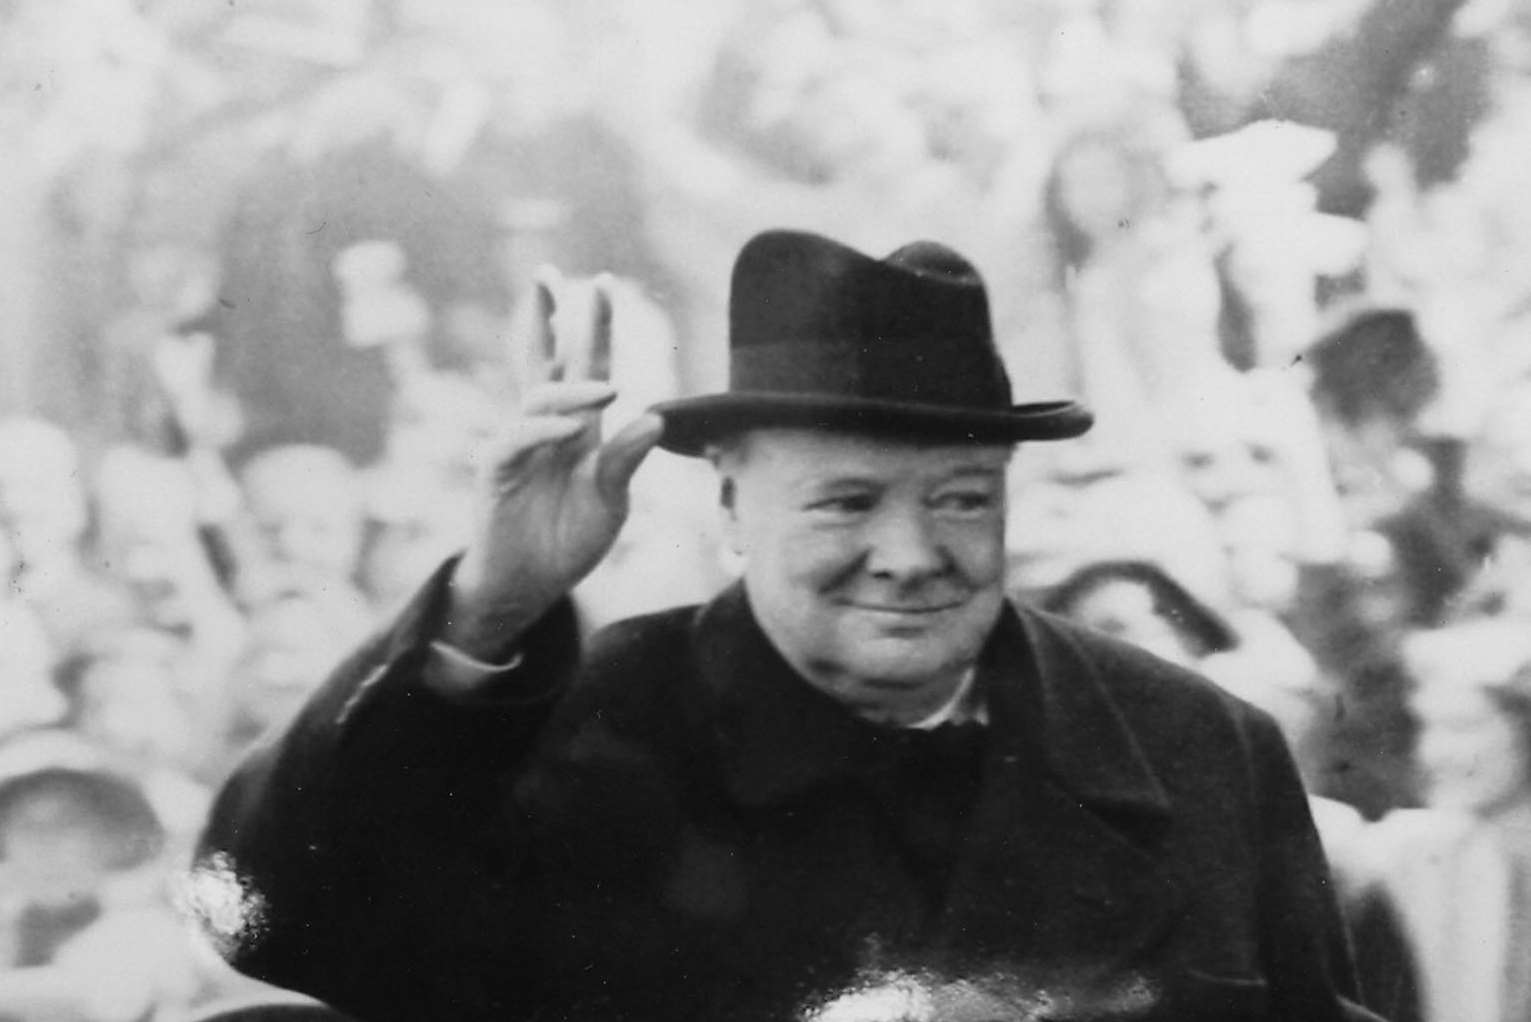 Winston Churchill during a visit to Hague, Netherlands in 1945